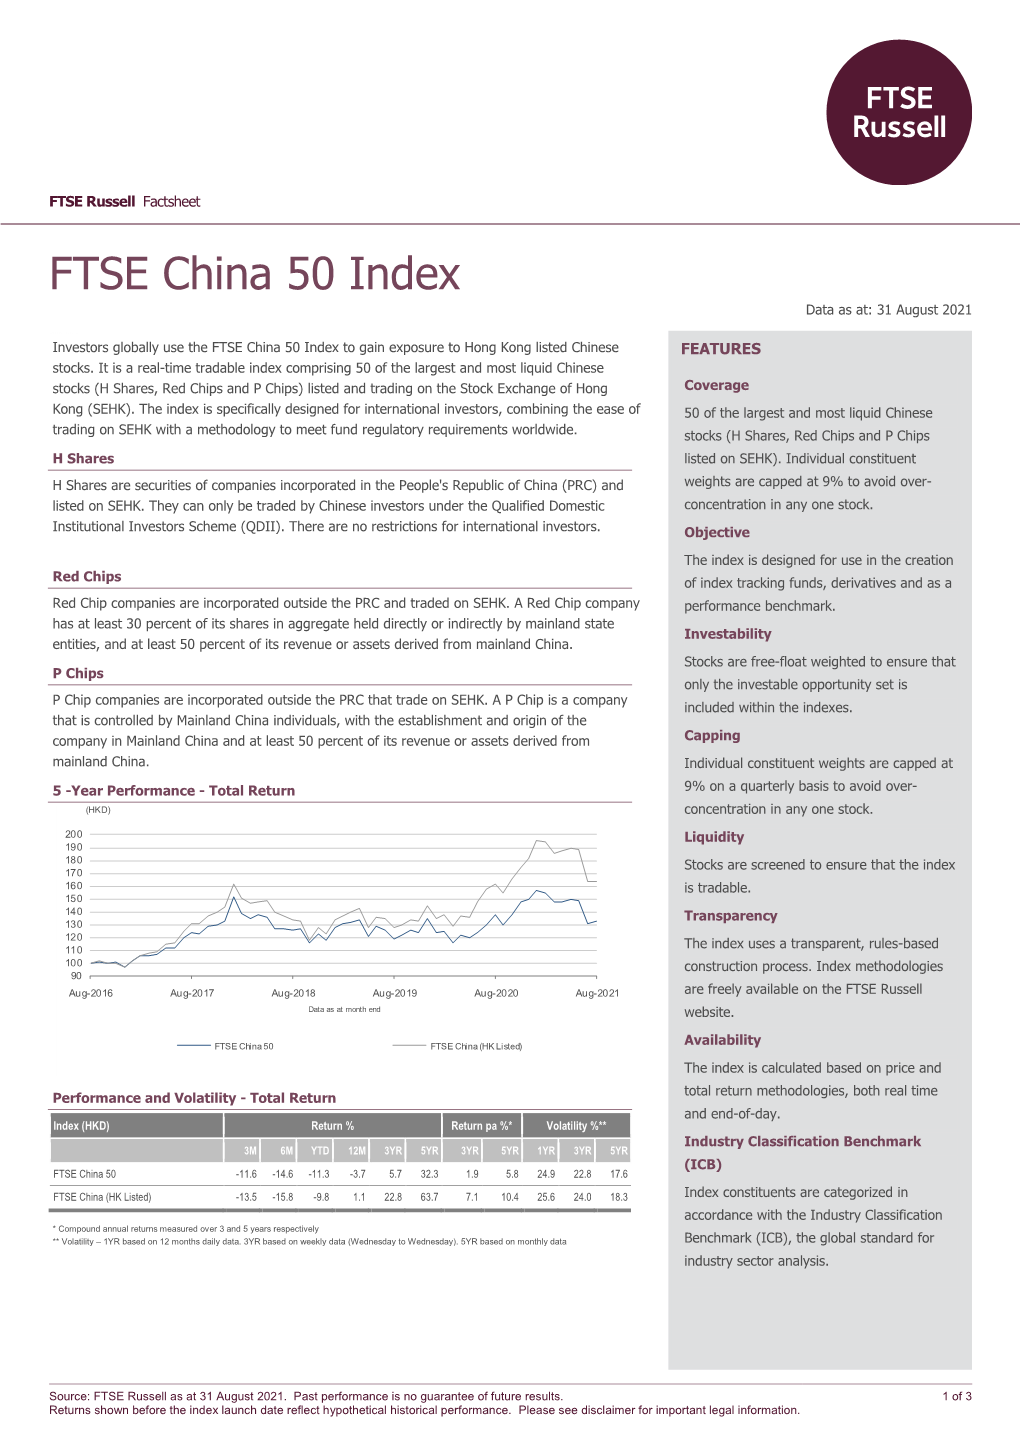 FTSE China 50 Index Data As At: 31 August 2021 Bmktitle1 Investors Globally Use the FTSE China 50 Index to Gain Exposure to Hong Kong Listed Chinese FEATURES Stocks